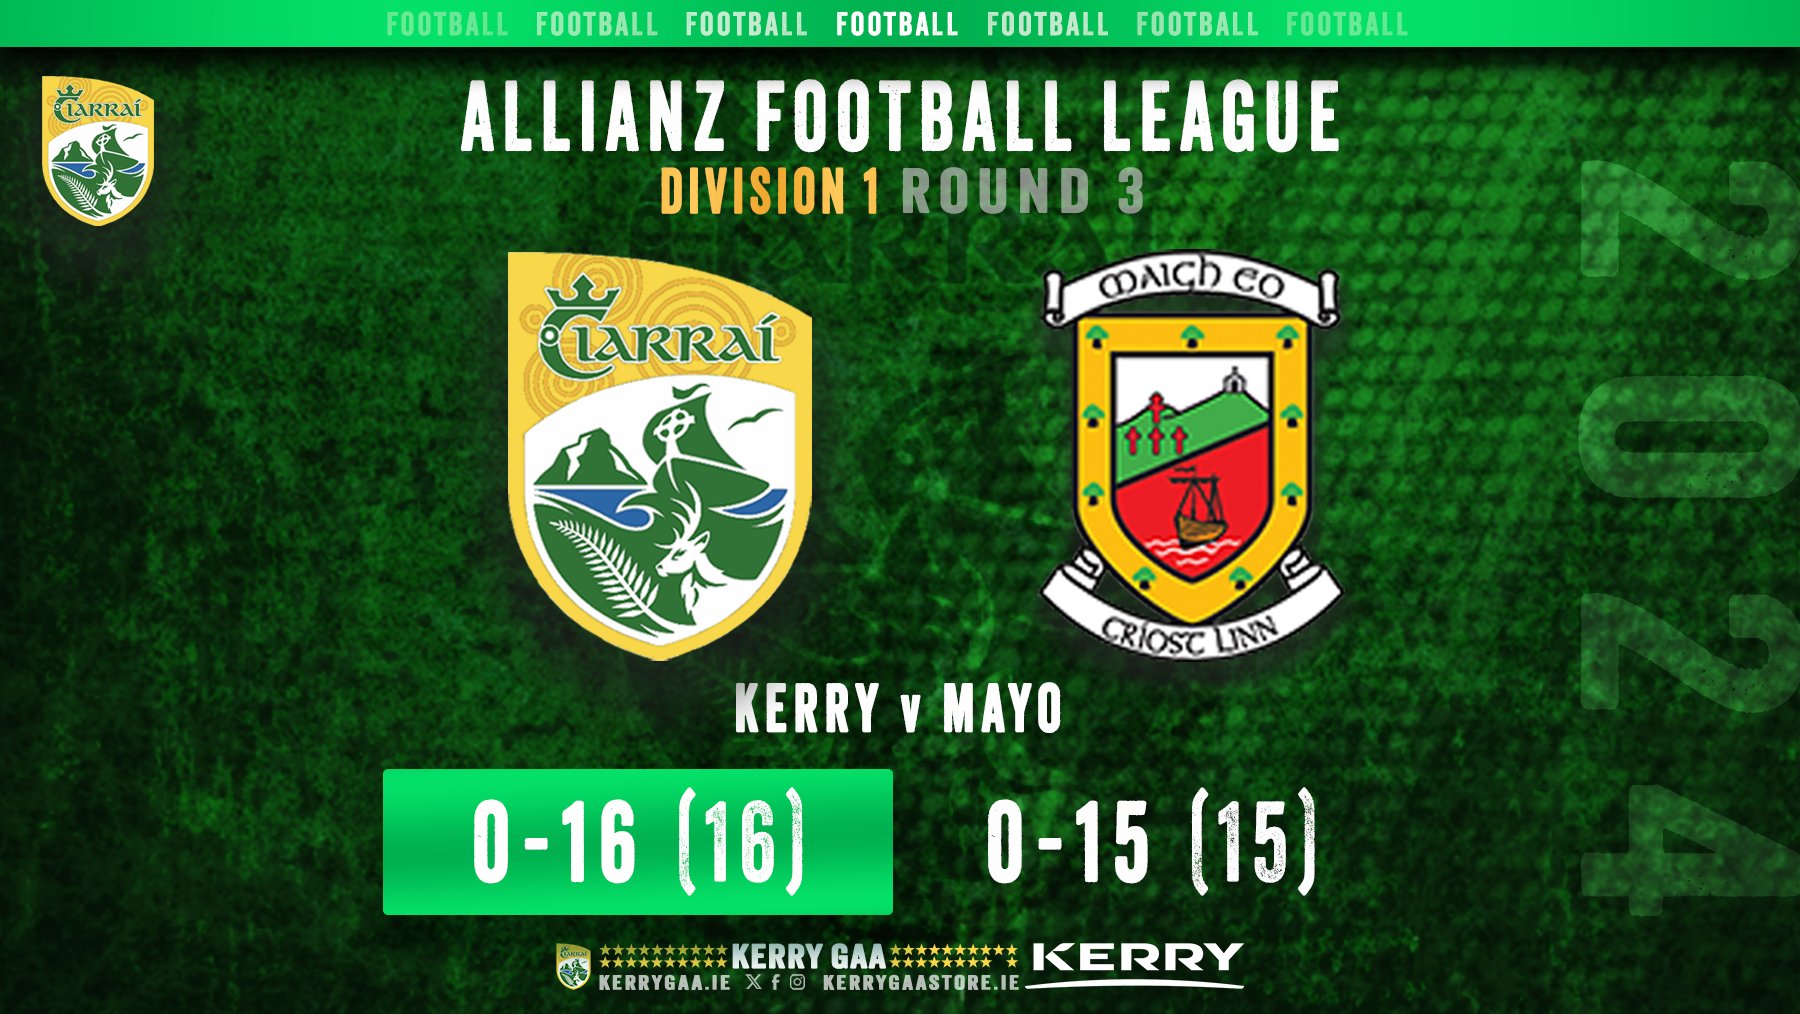 One point win for Kerry over Mayo